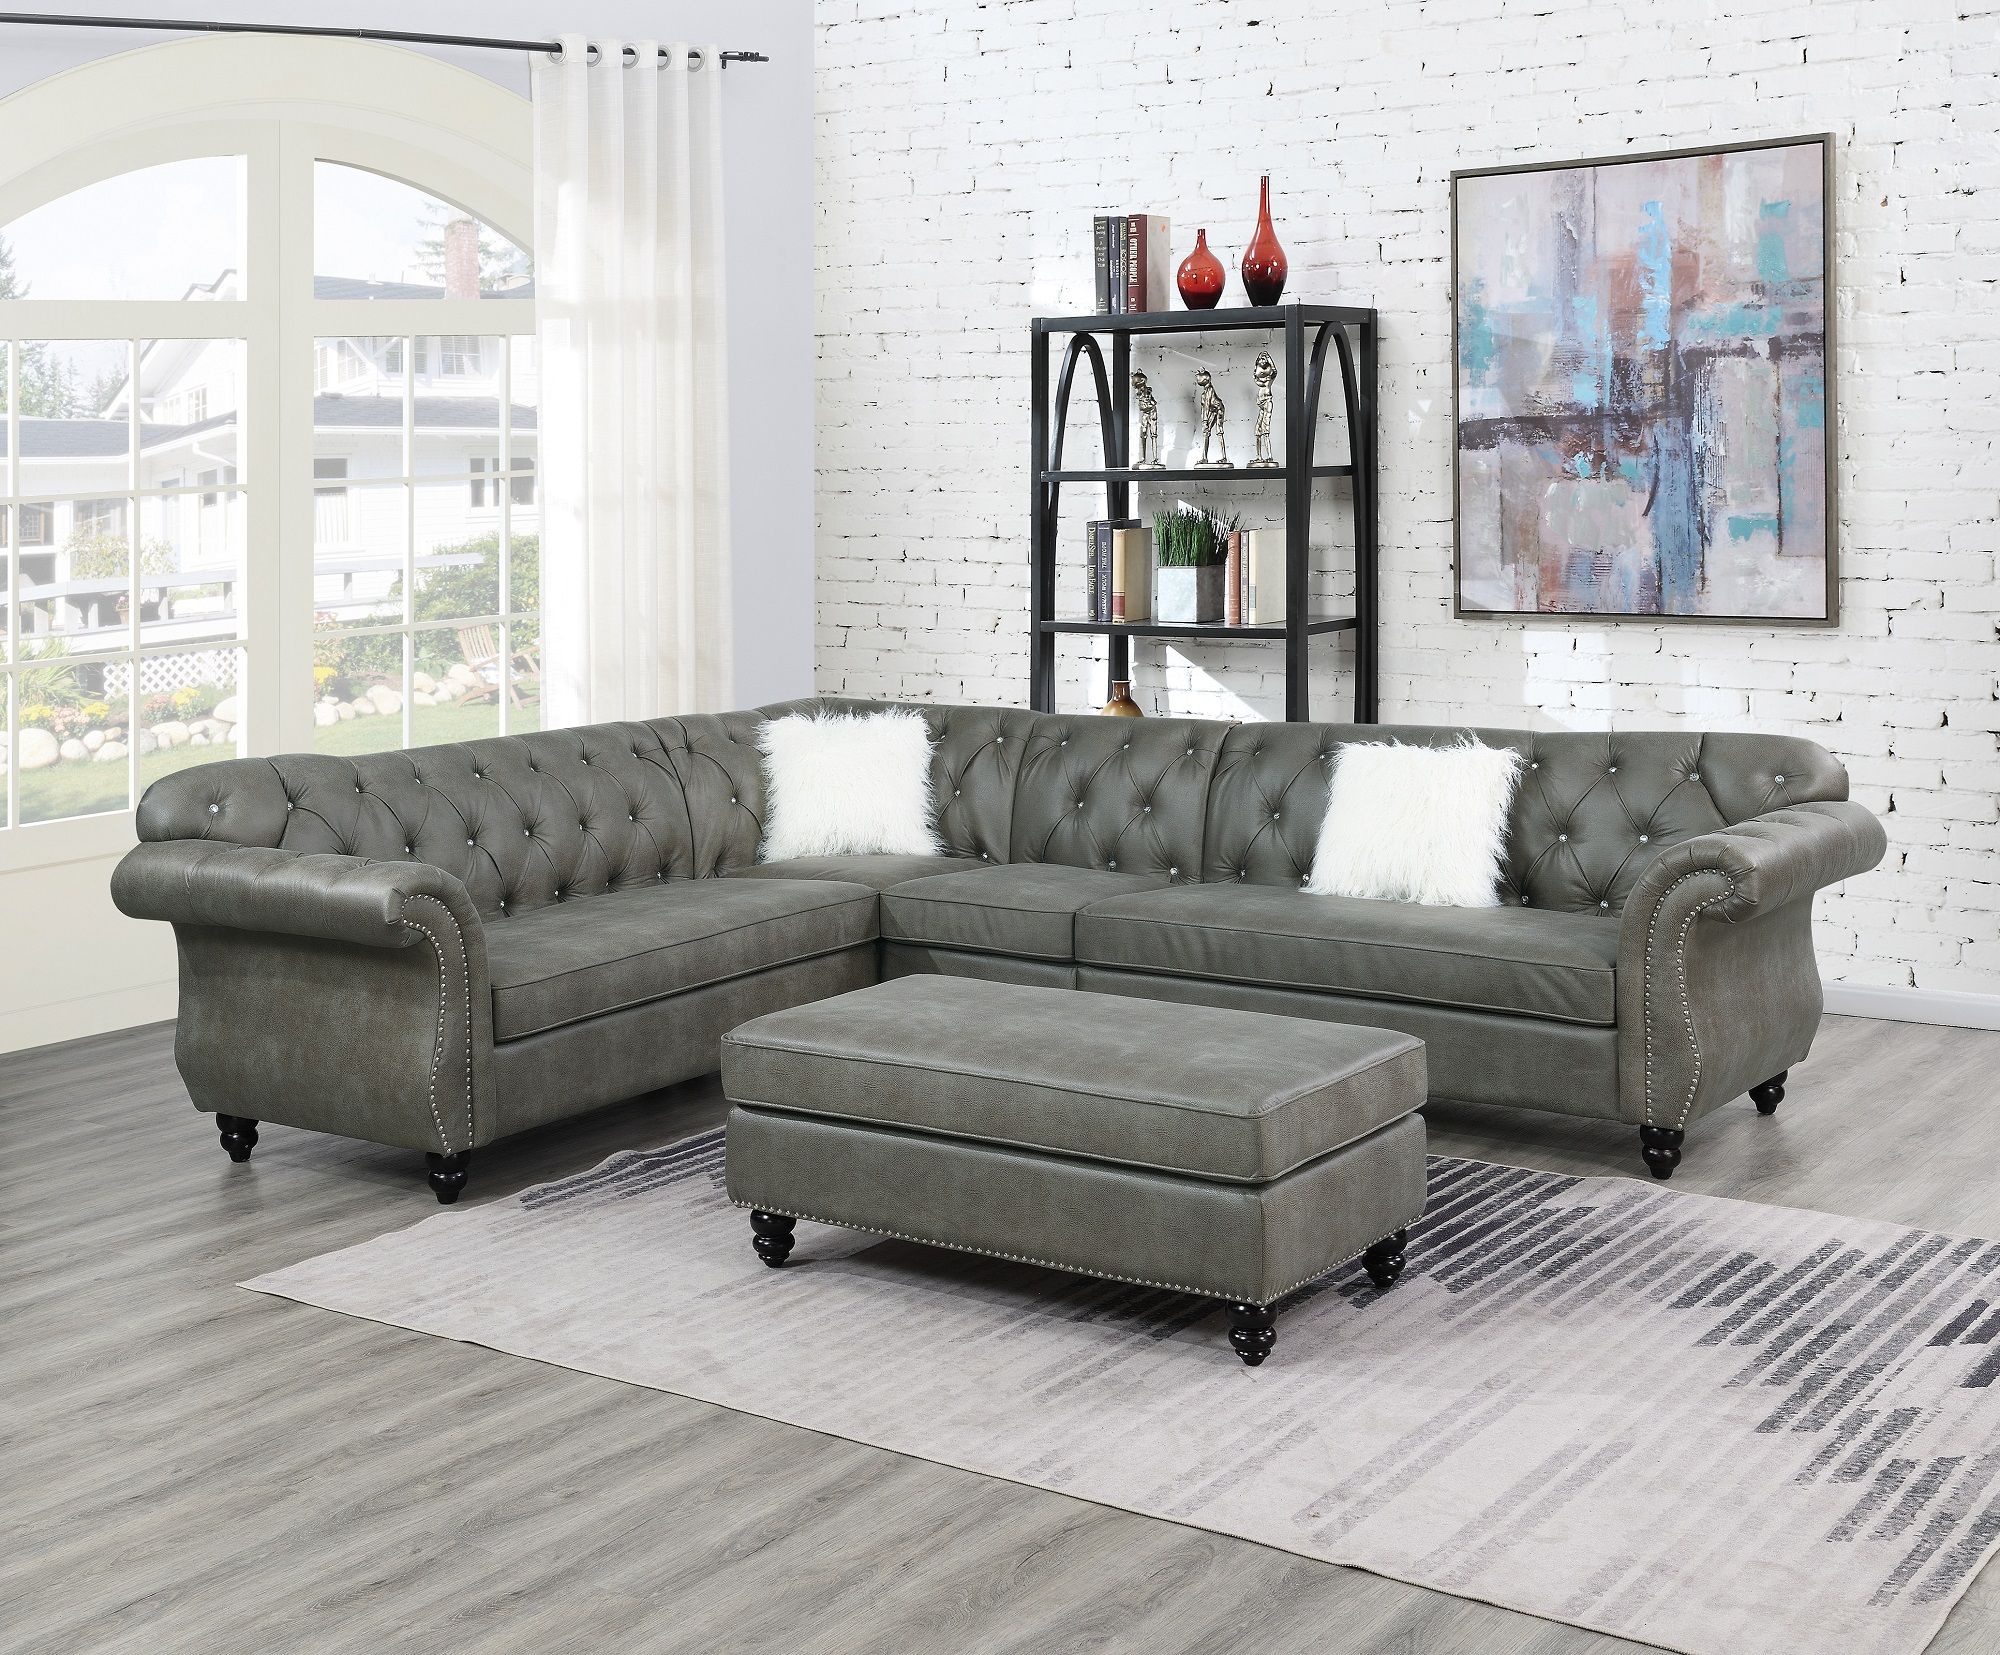 Contemporary Modern Living Room Sectional Sofa Set Slate Throughout 4pc Beckett Contemporary Sectional Sofas And Ottoman Sets (View 2 of 15)